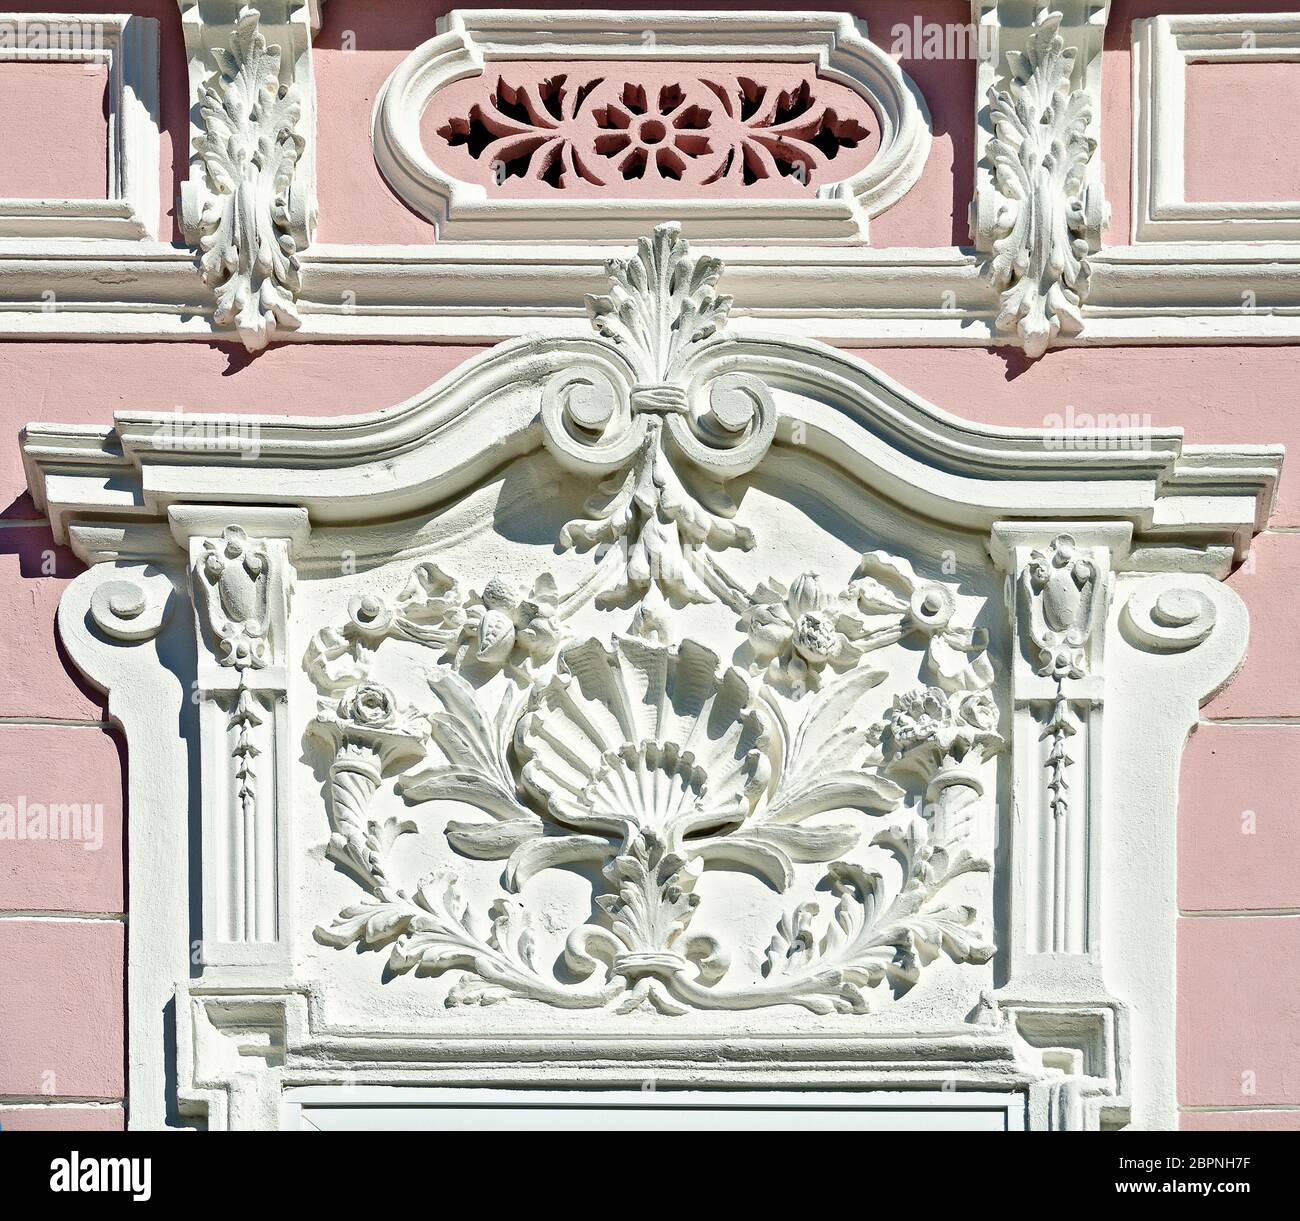 white baroque architectural decoration with ornaments and arabesques on a house front, Weitra, Austria Stock Photo